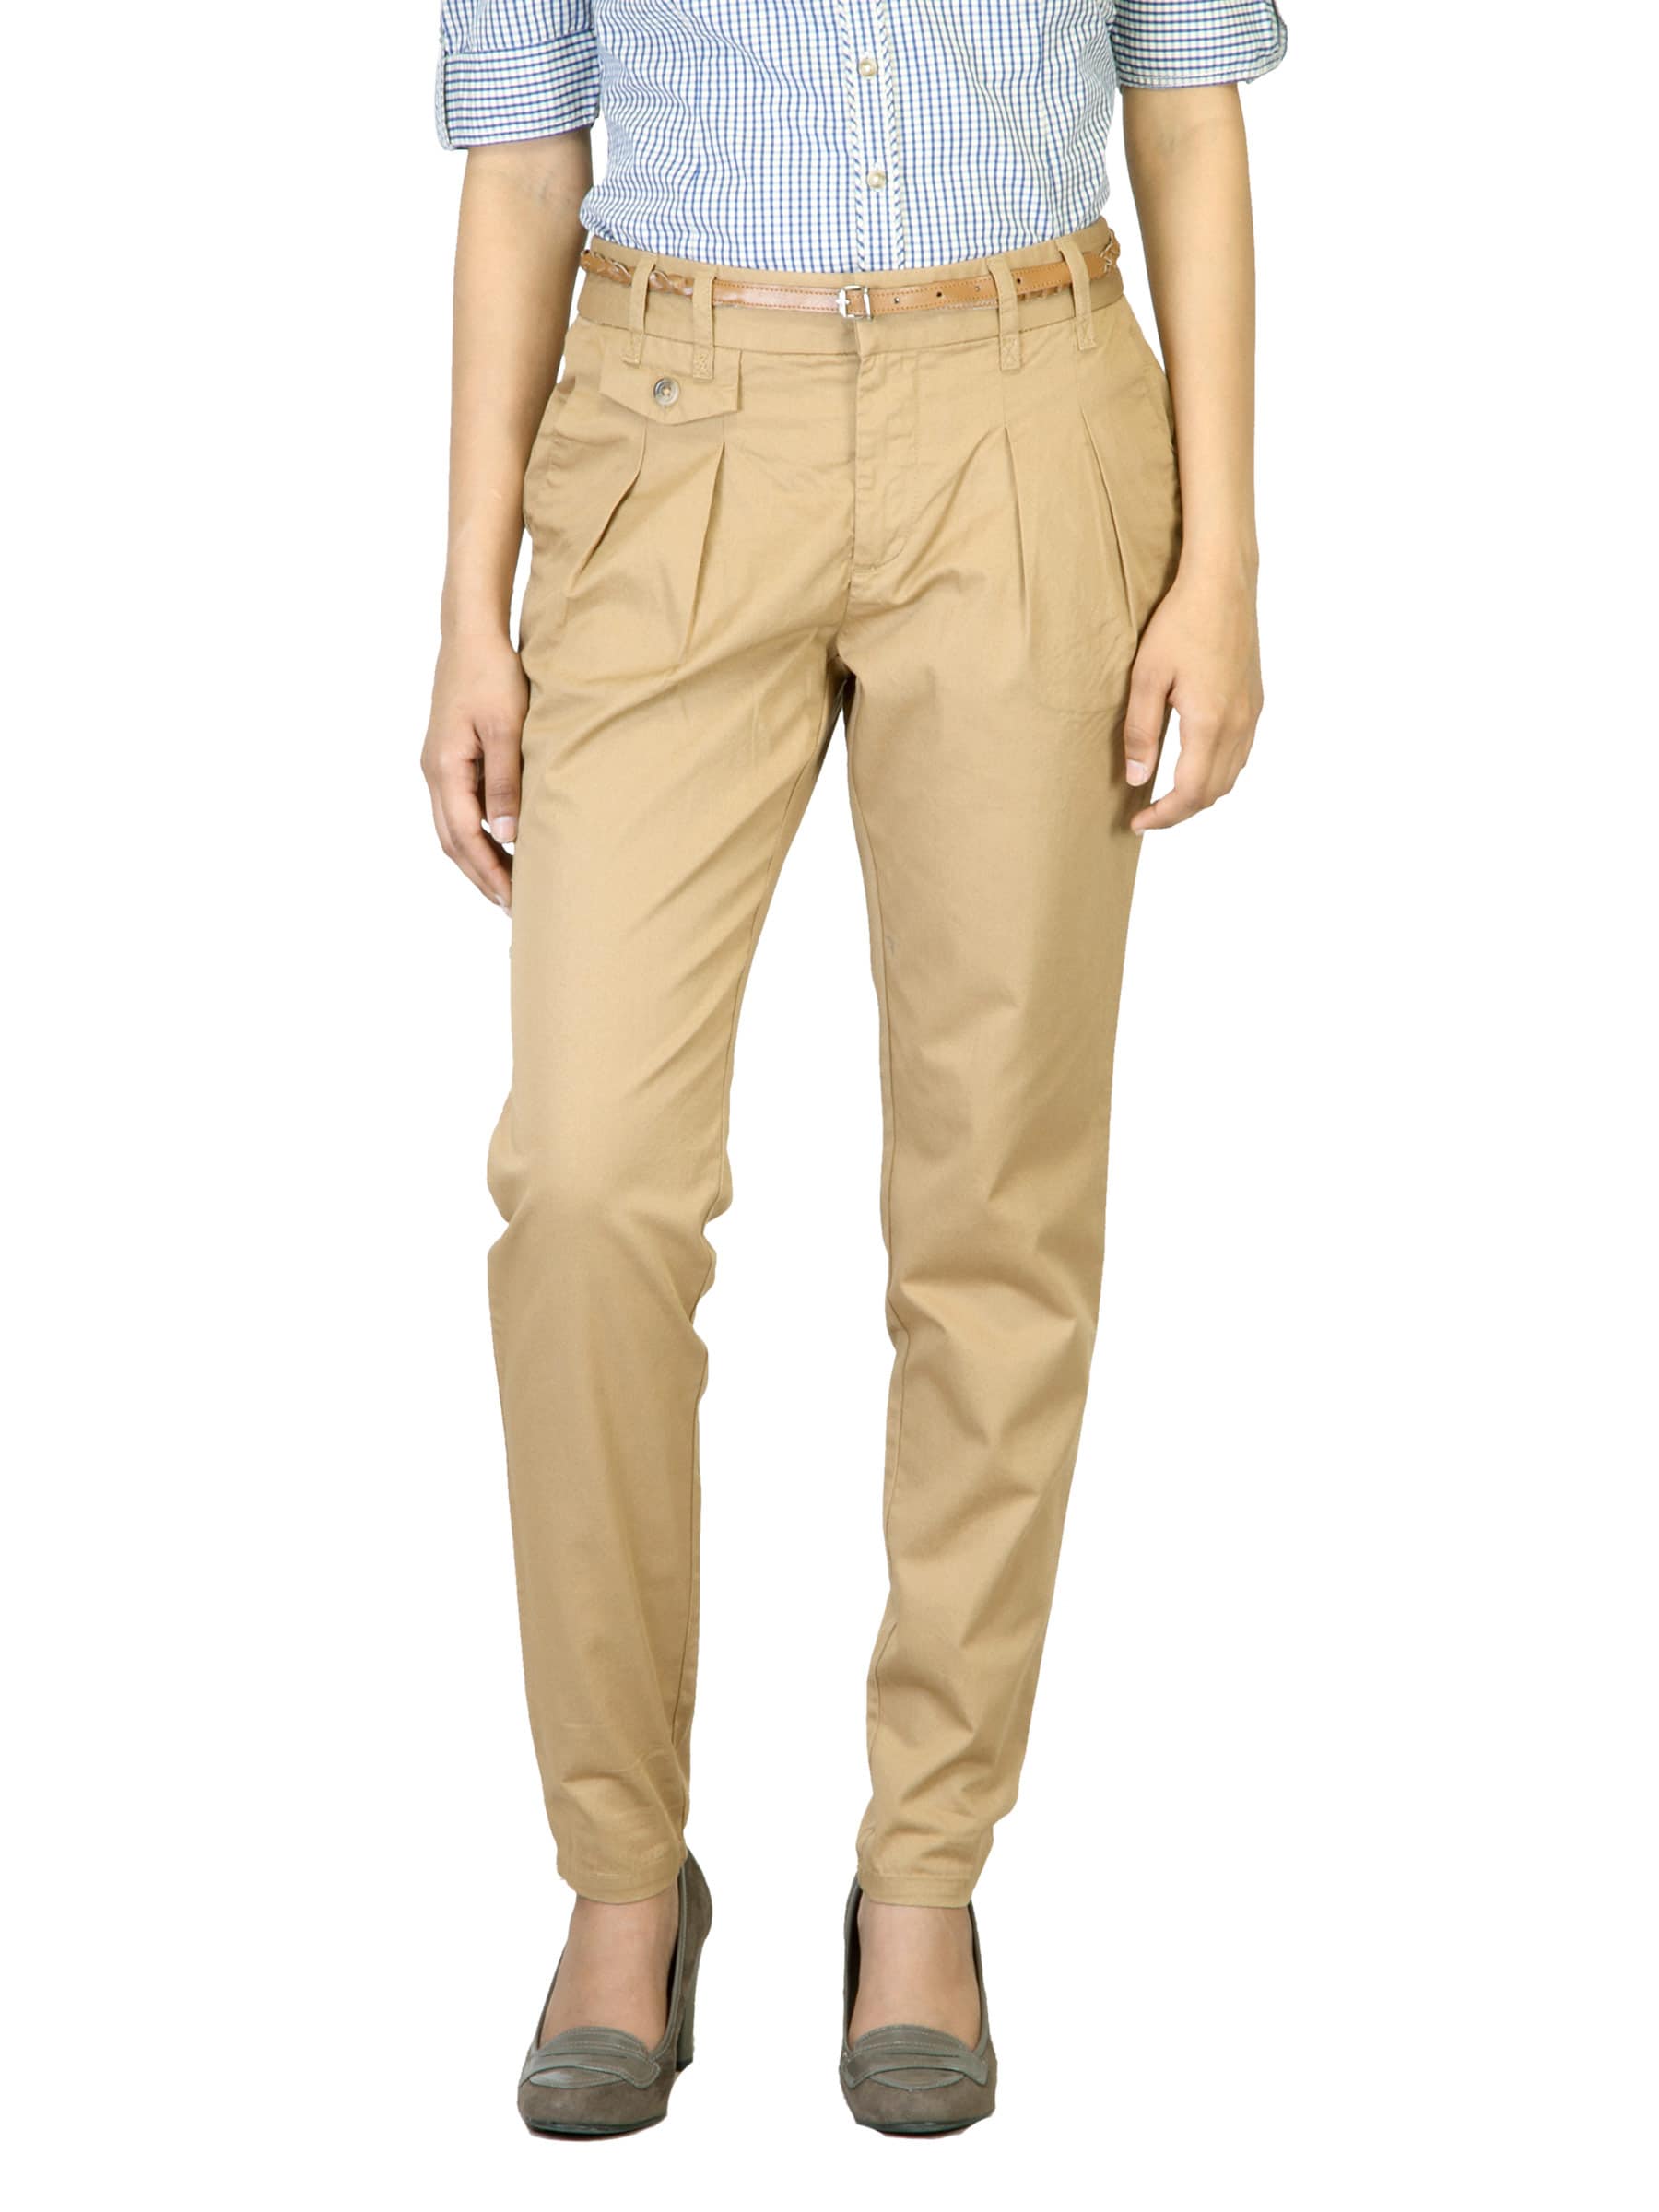 Scullers For Her Women Tan Trousers